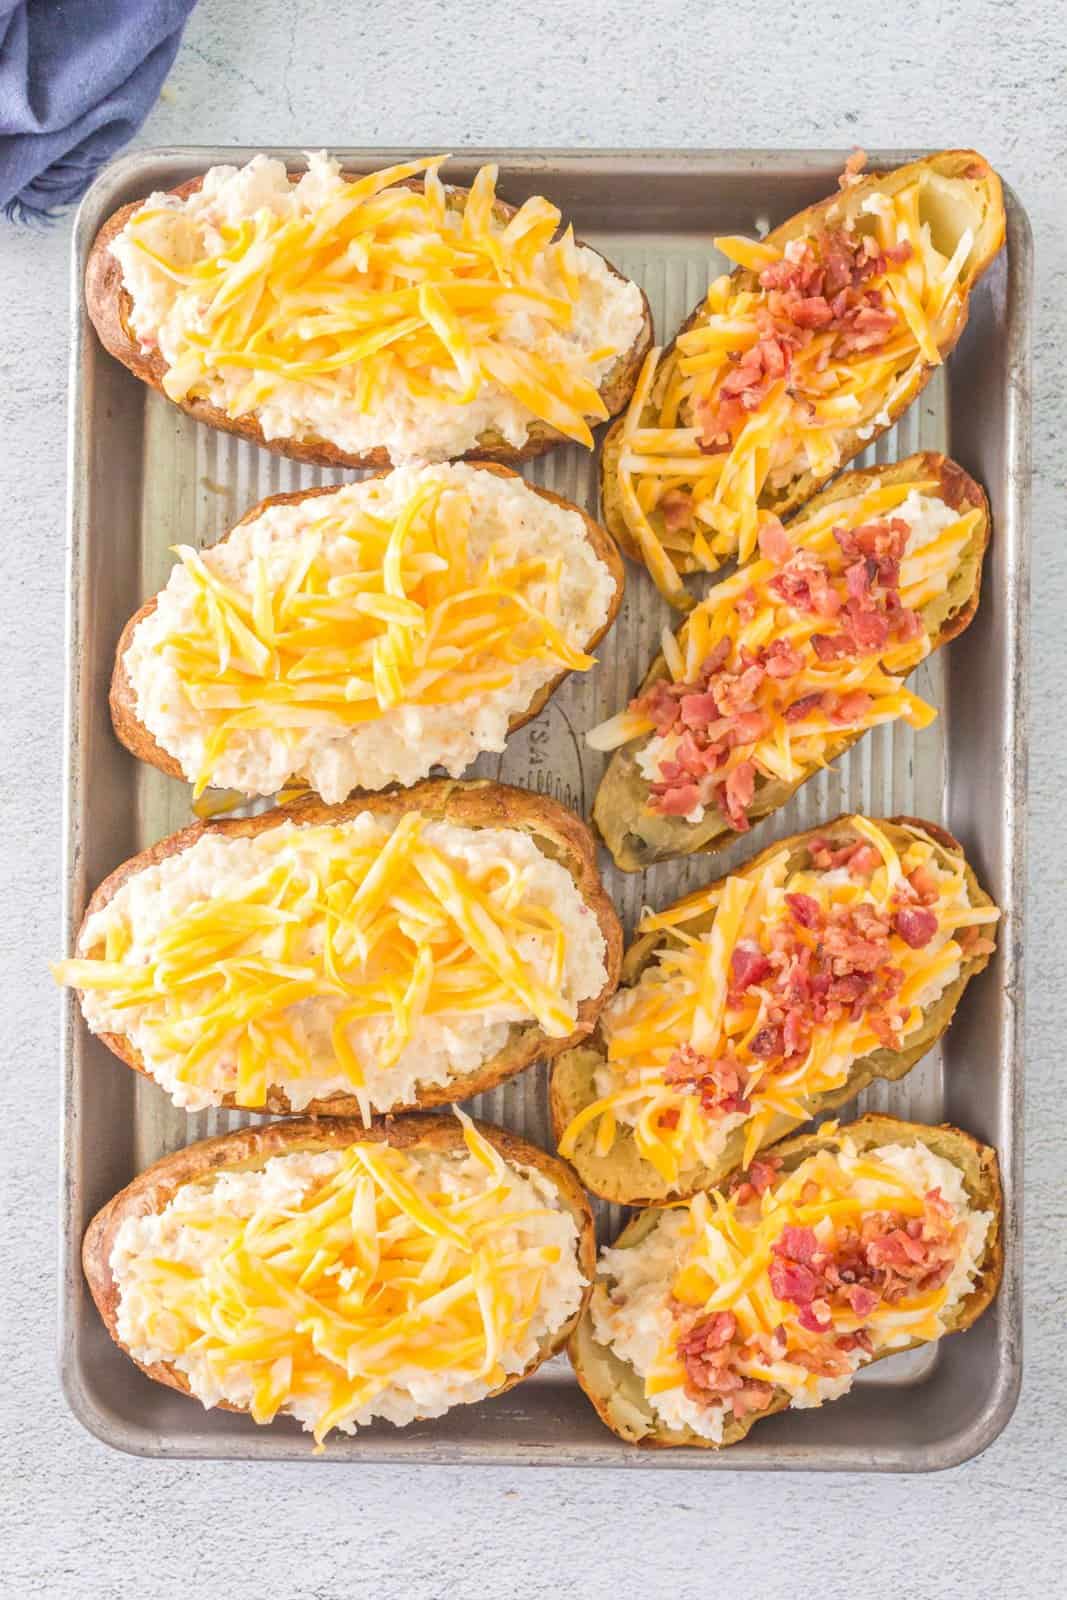 Potatoes topped with cheese and bacon.